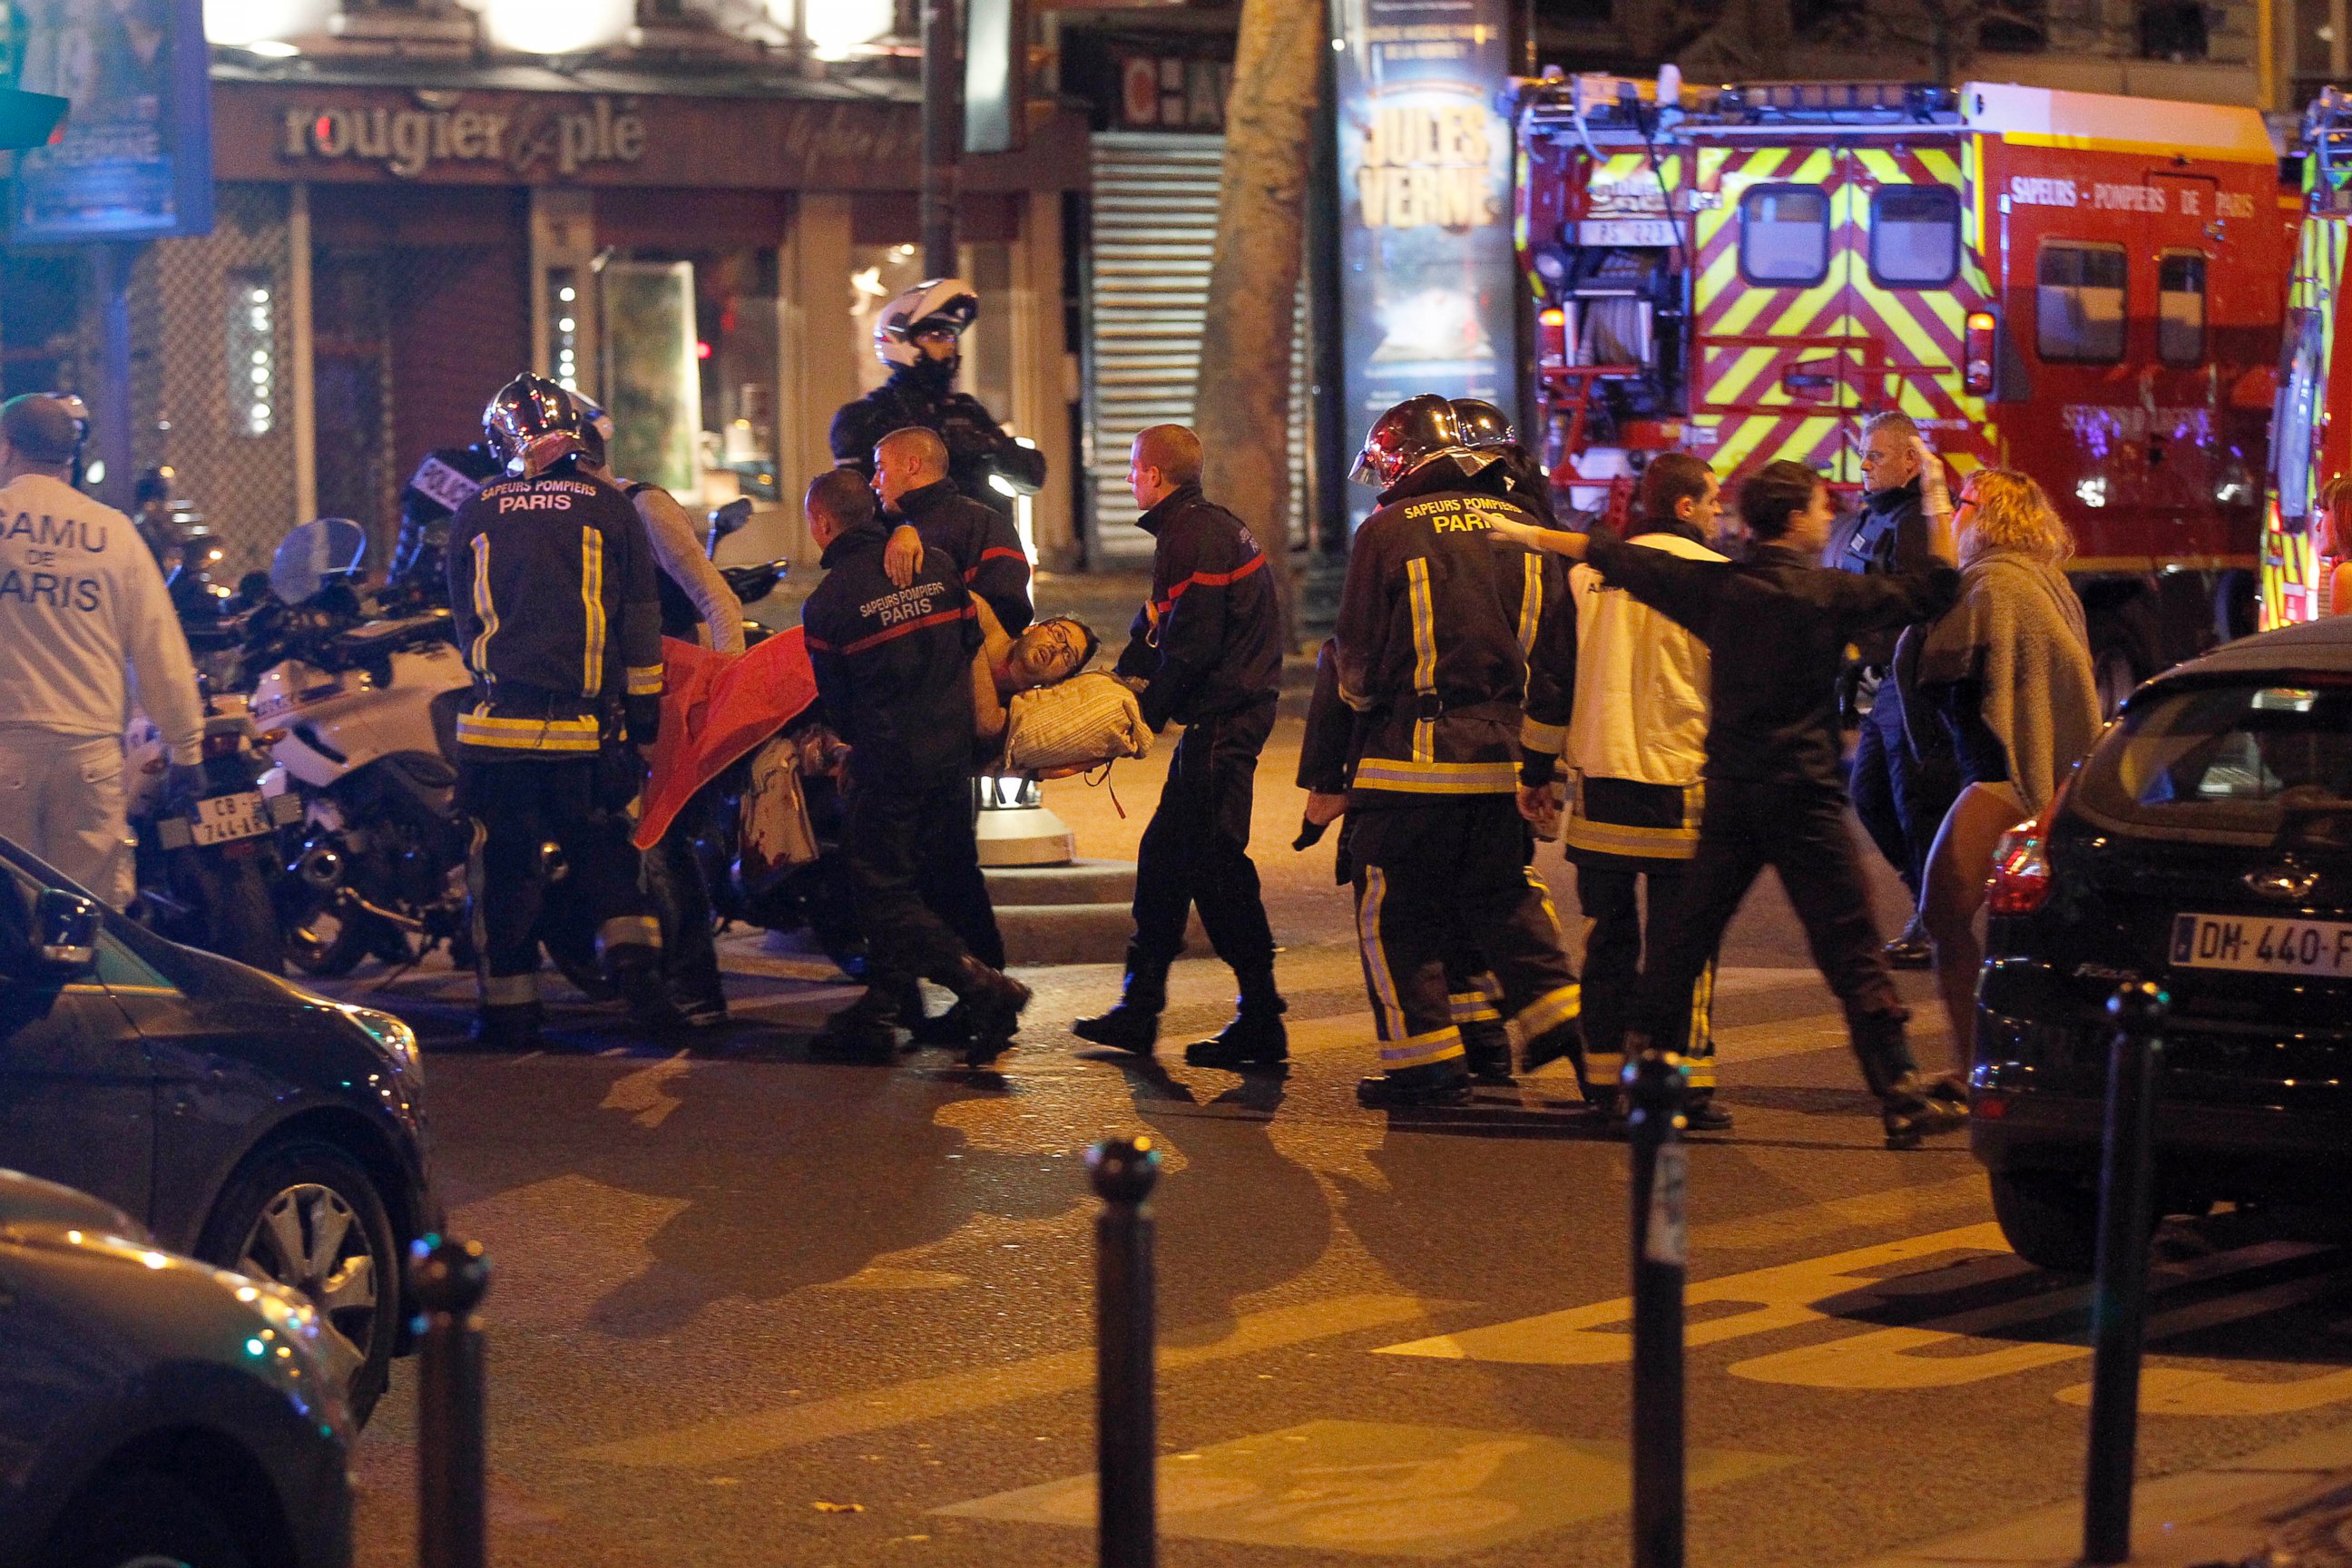 PHOTO: Medics move a wounded man near the Boulevard des Filles-du-Calvaire after an attack November 13, 2013 in Paris, France. Gunfire and explosions in multiple locations erupted in the French capital with early casualty reports indicating many dead. 